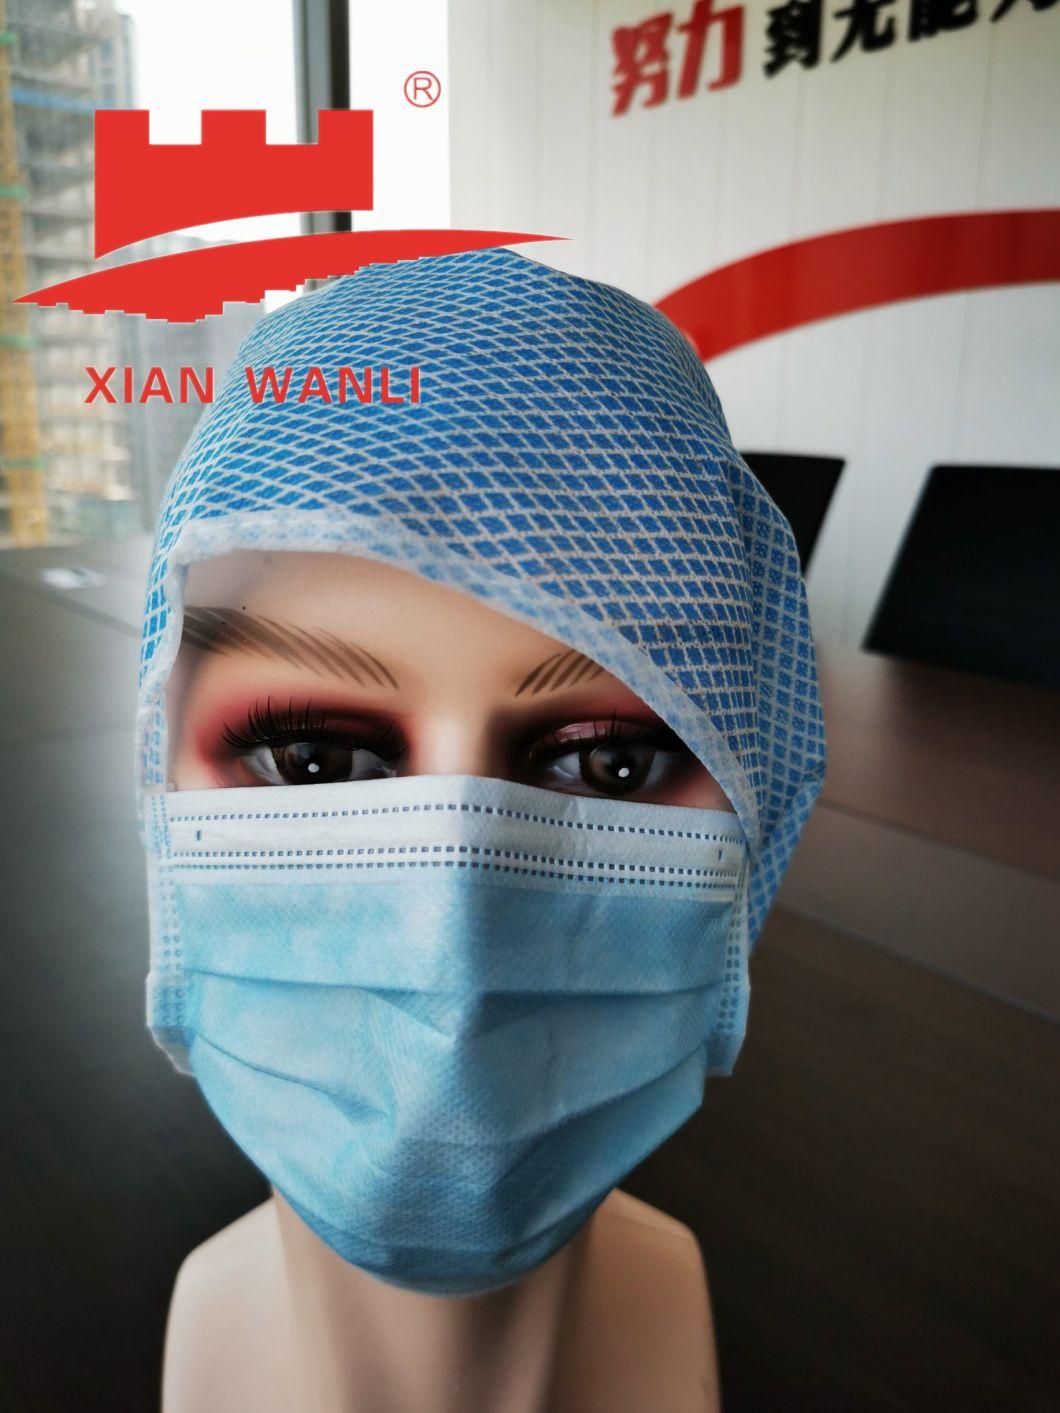 Nurse Cap for Hospital Nonwoven Spunlace Scrub Hats Surgical Cap with Ties